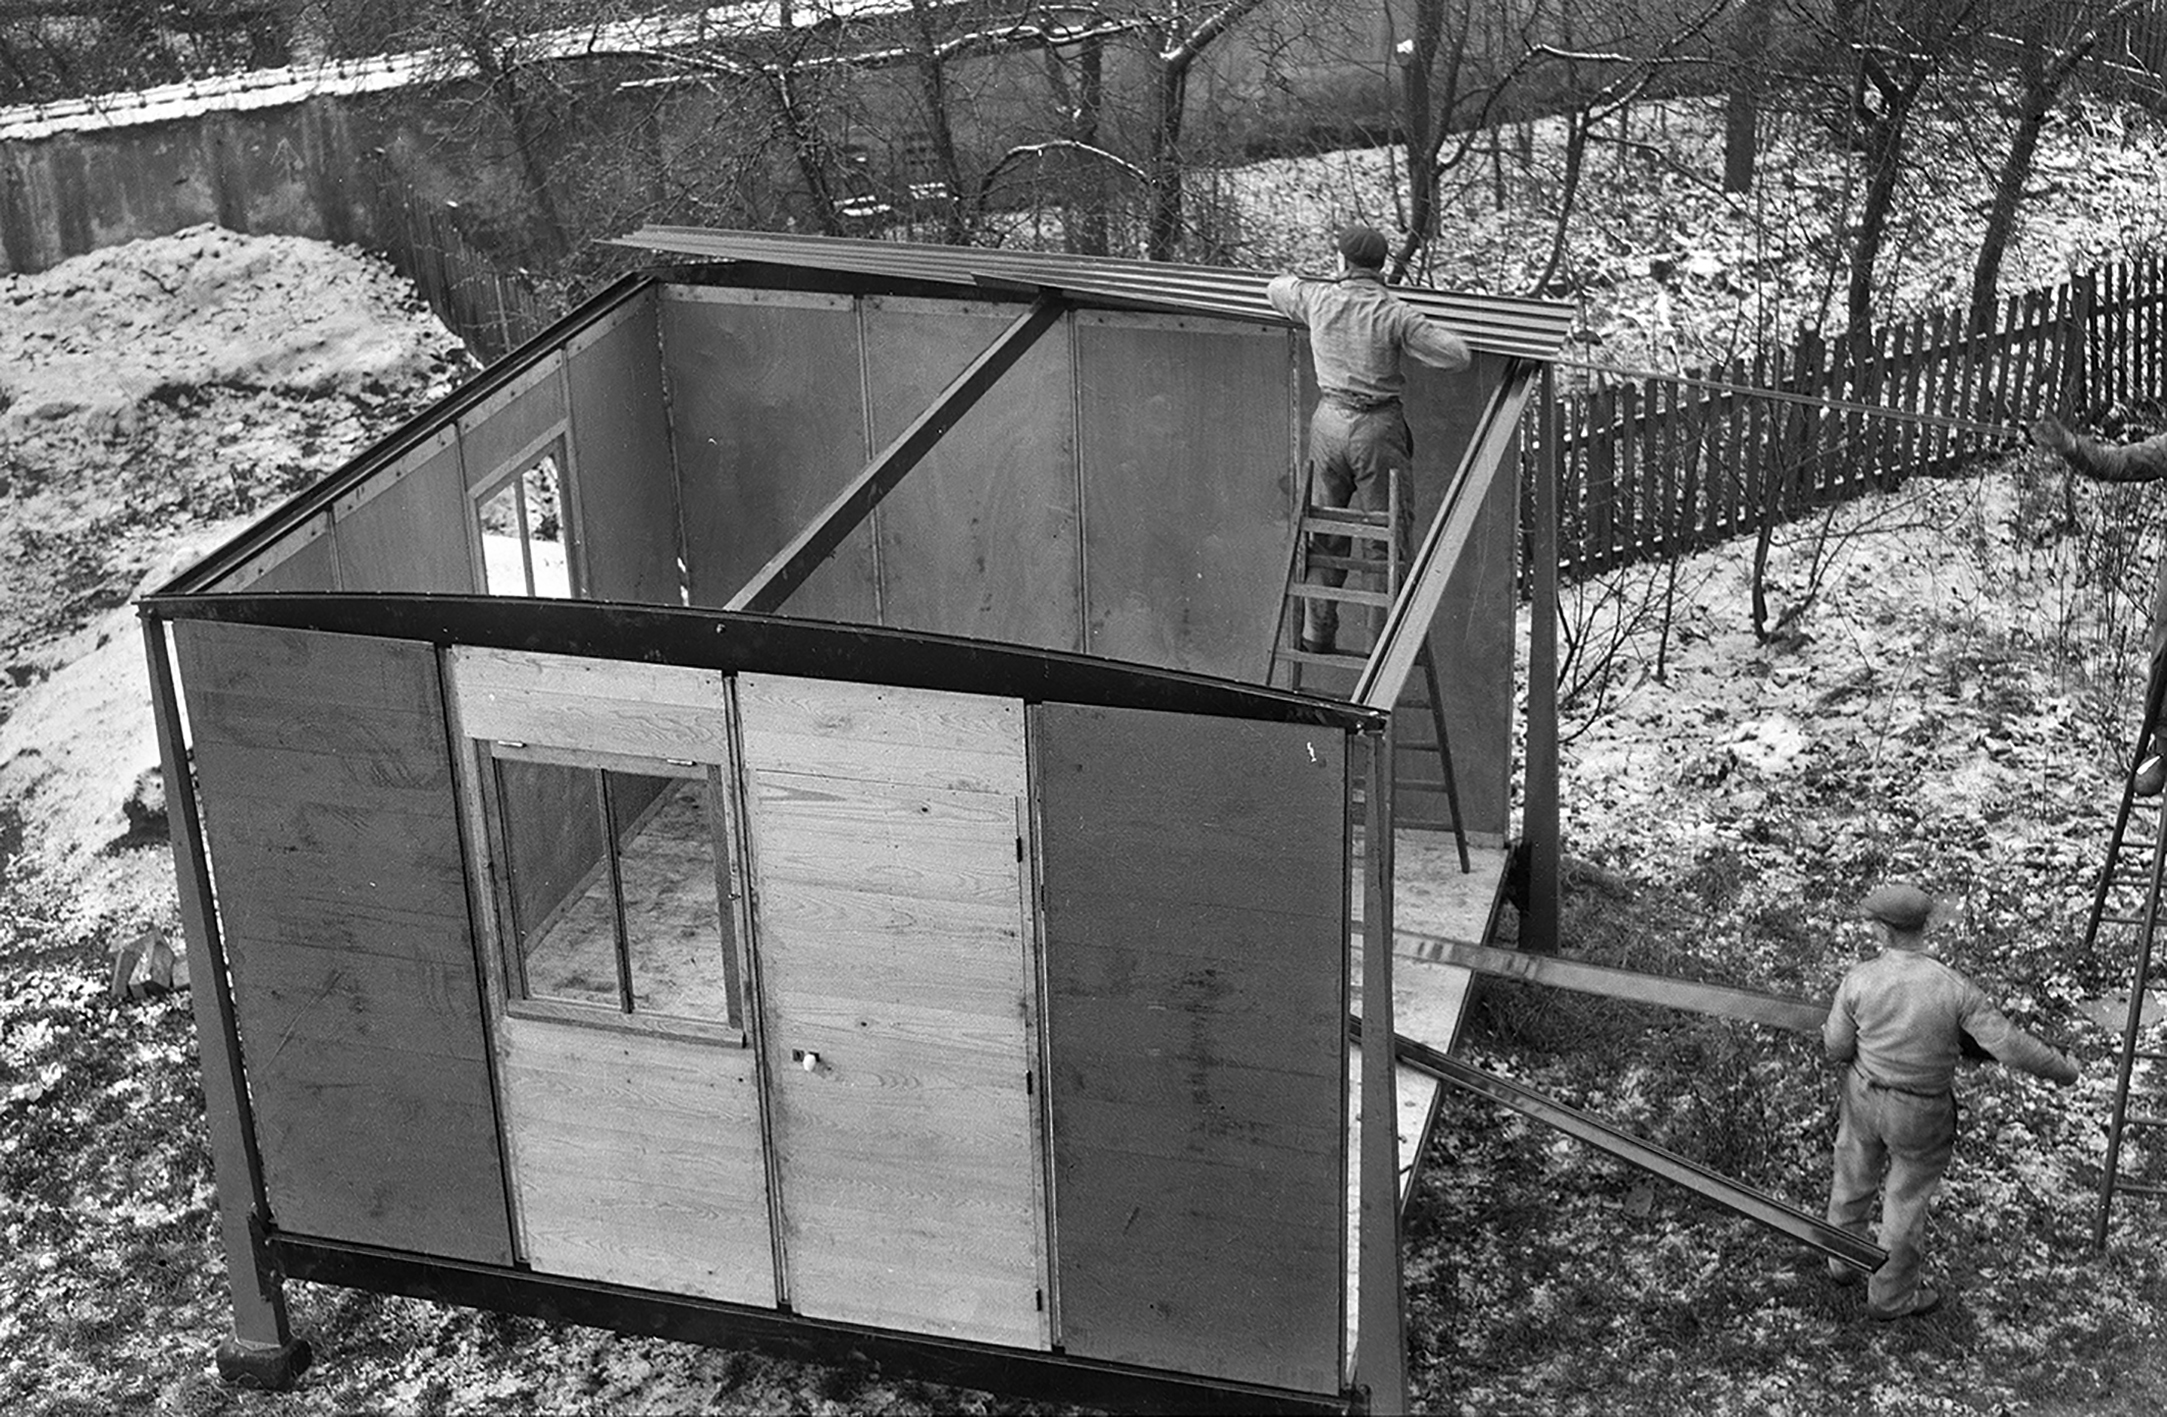 4x4 Military Shelter. Assembling the prototype at the Ateliers Jean Prouvé, Rue des Jardiniers, Nancy, November 1939.